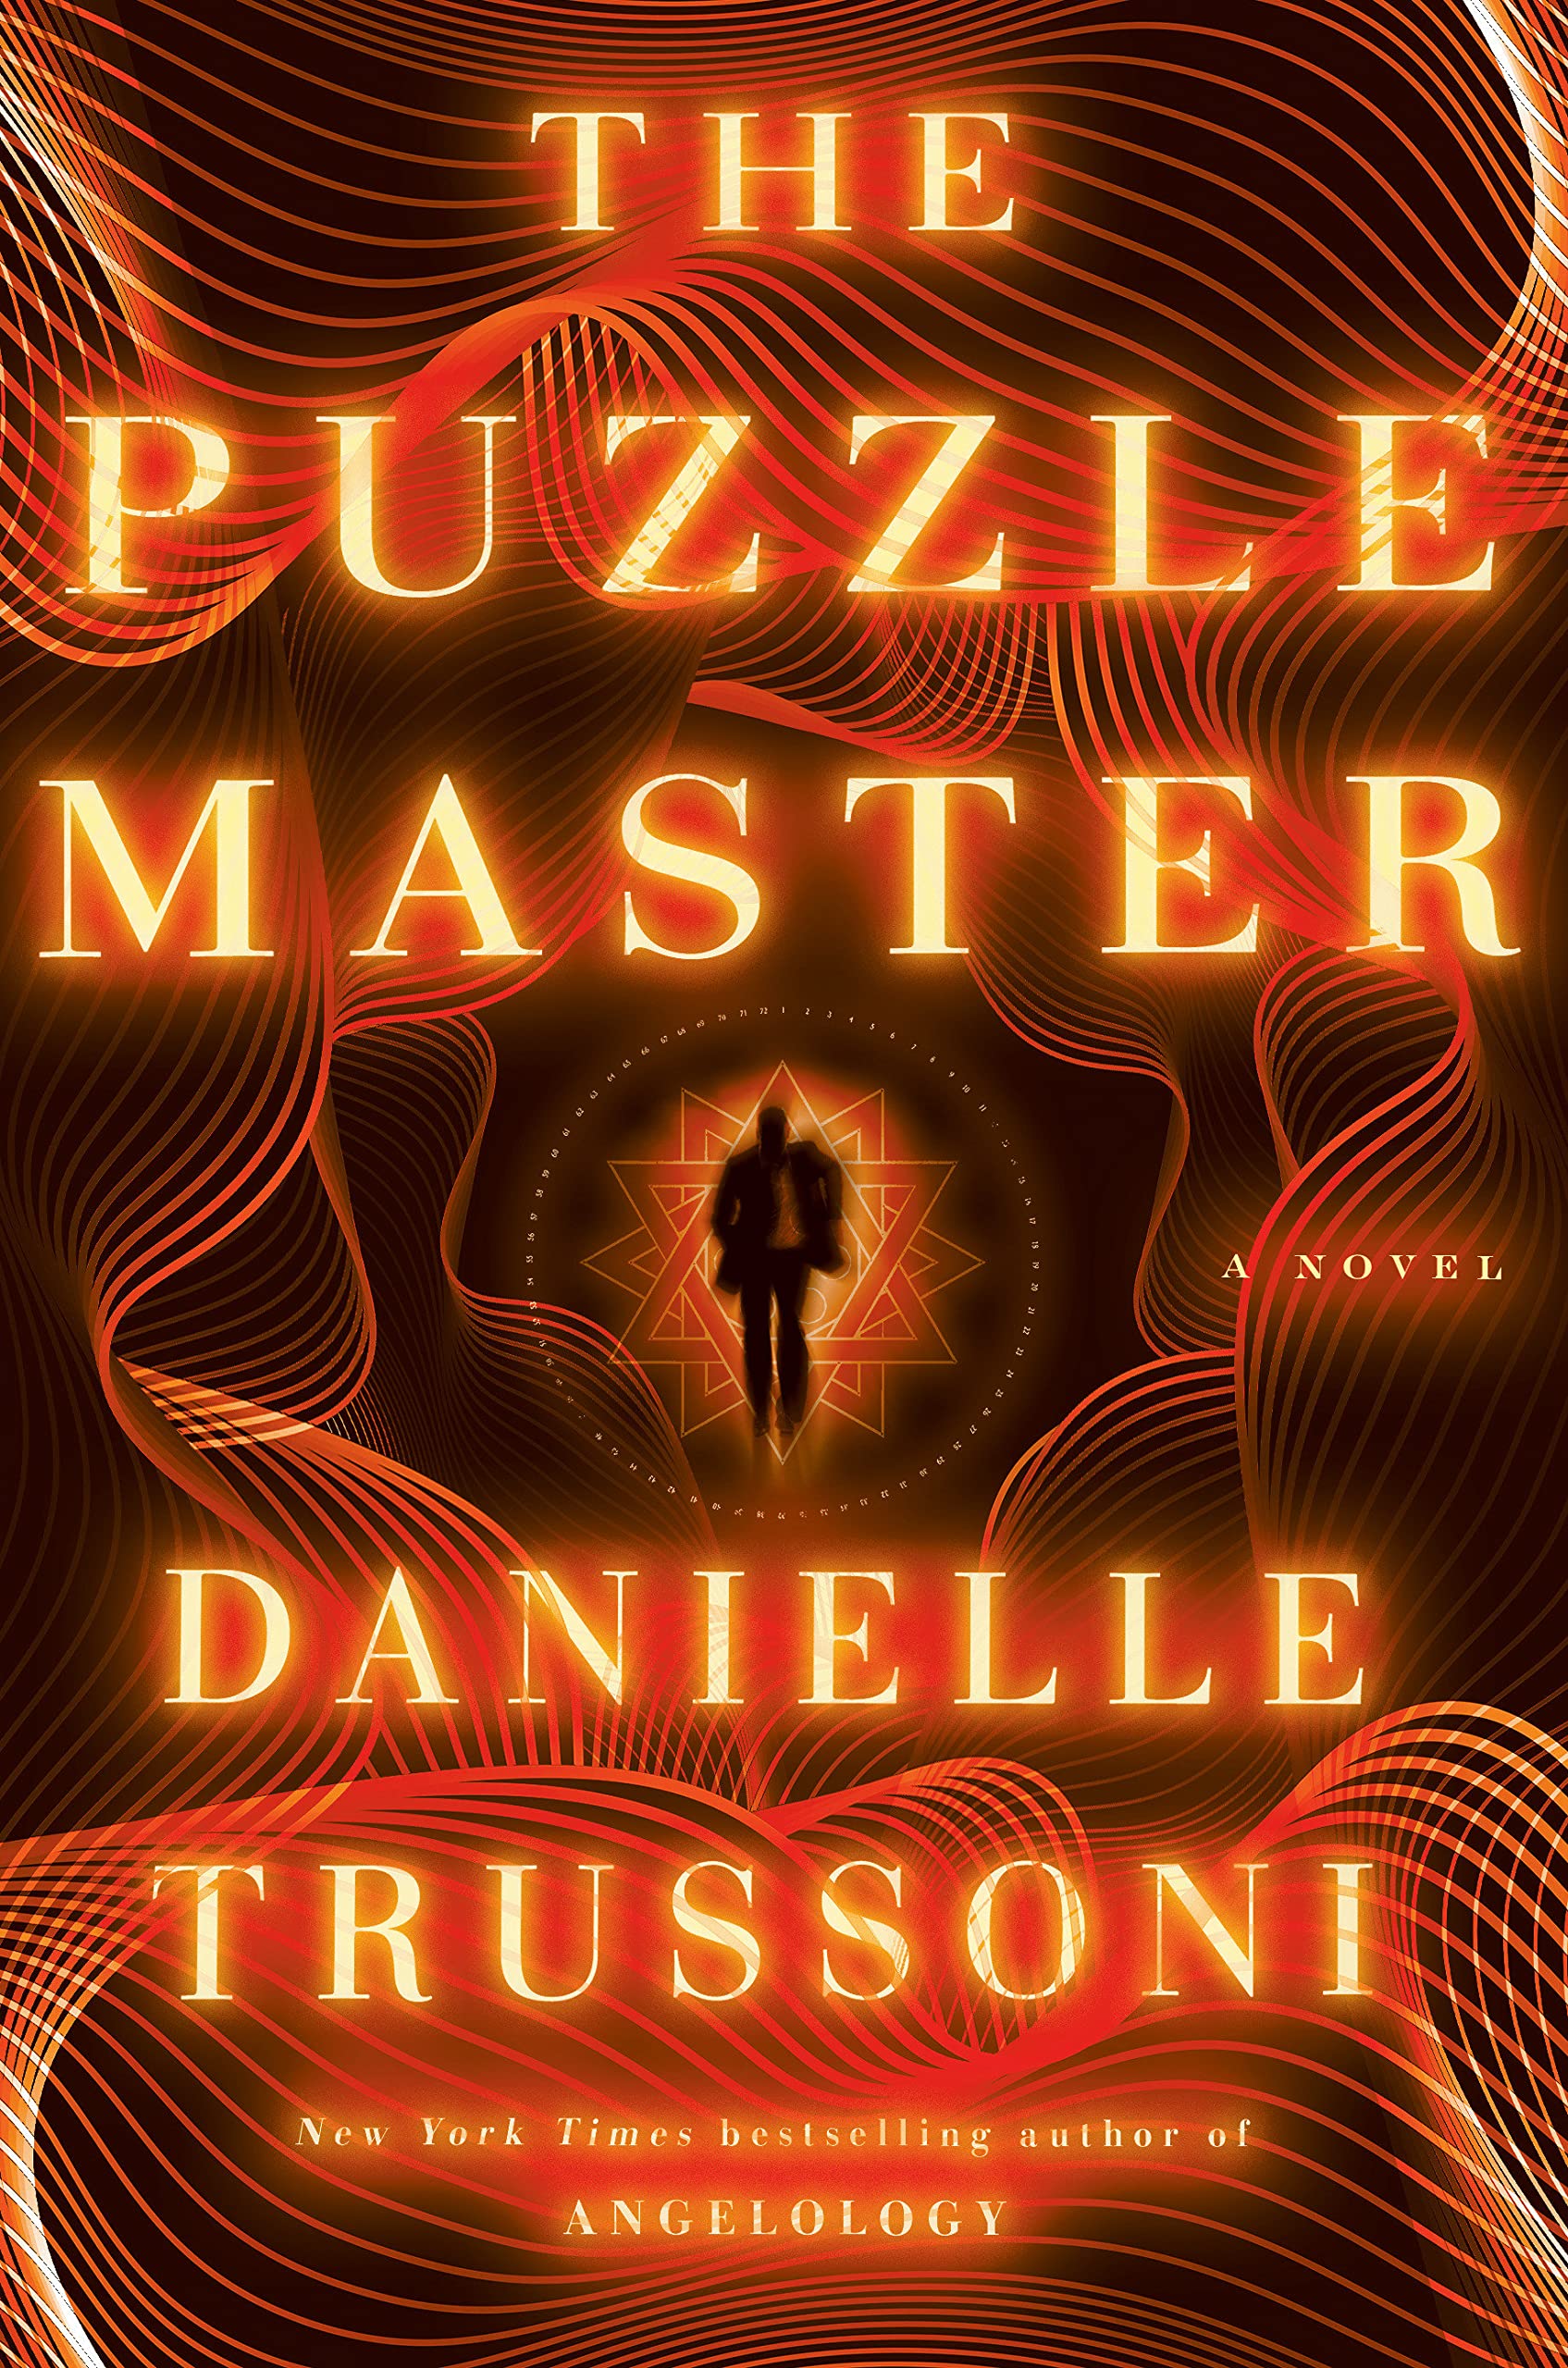 Image for "The Puzzle Master"